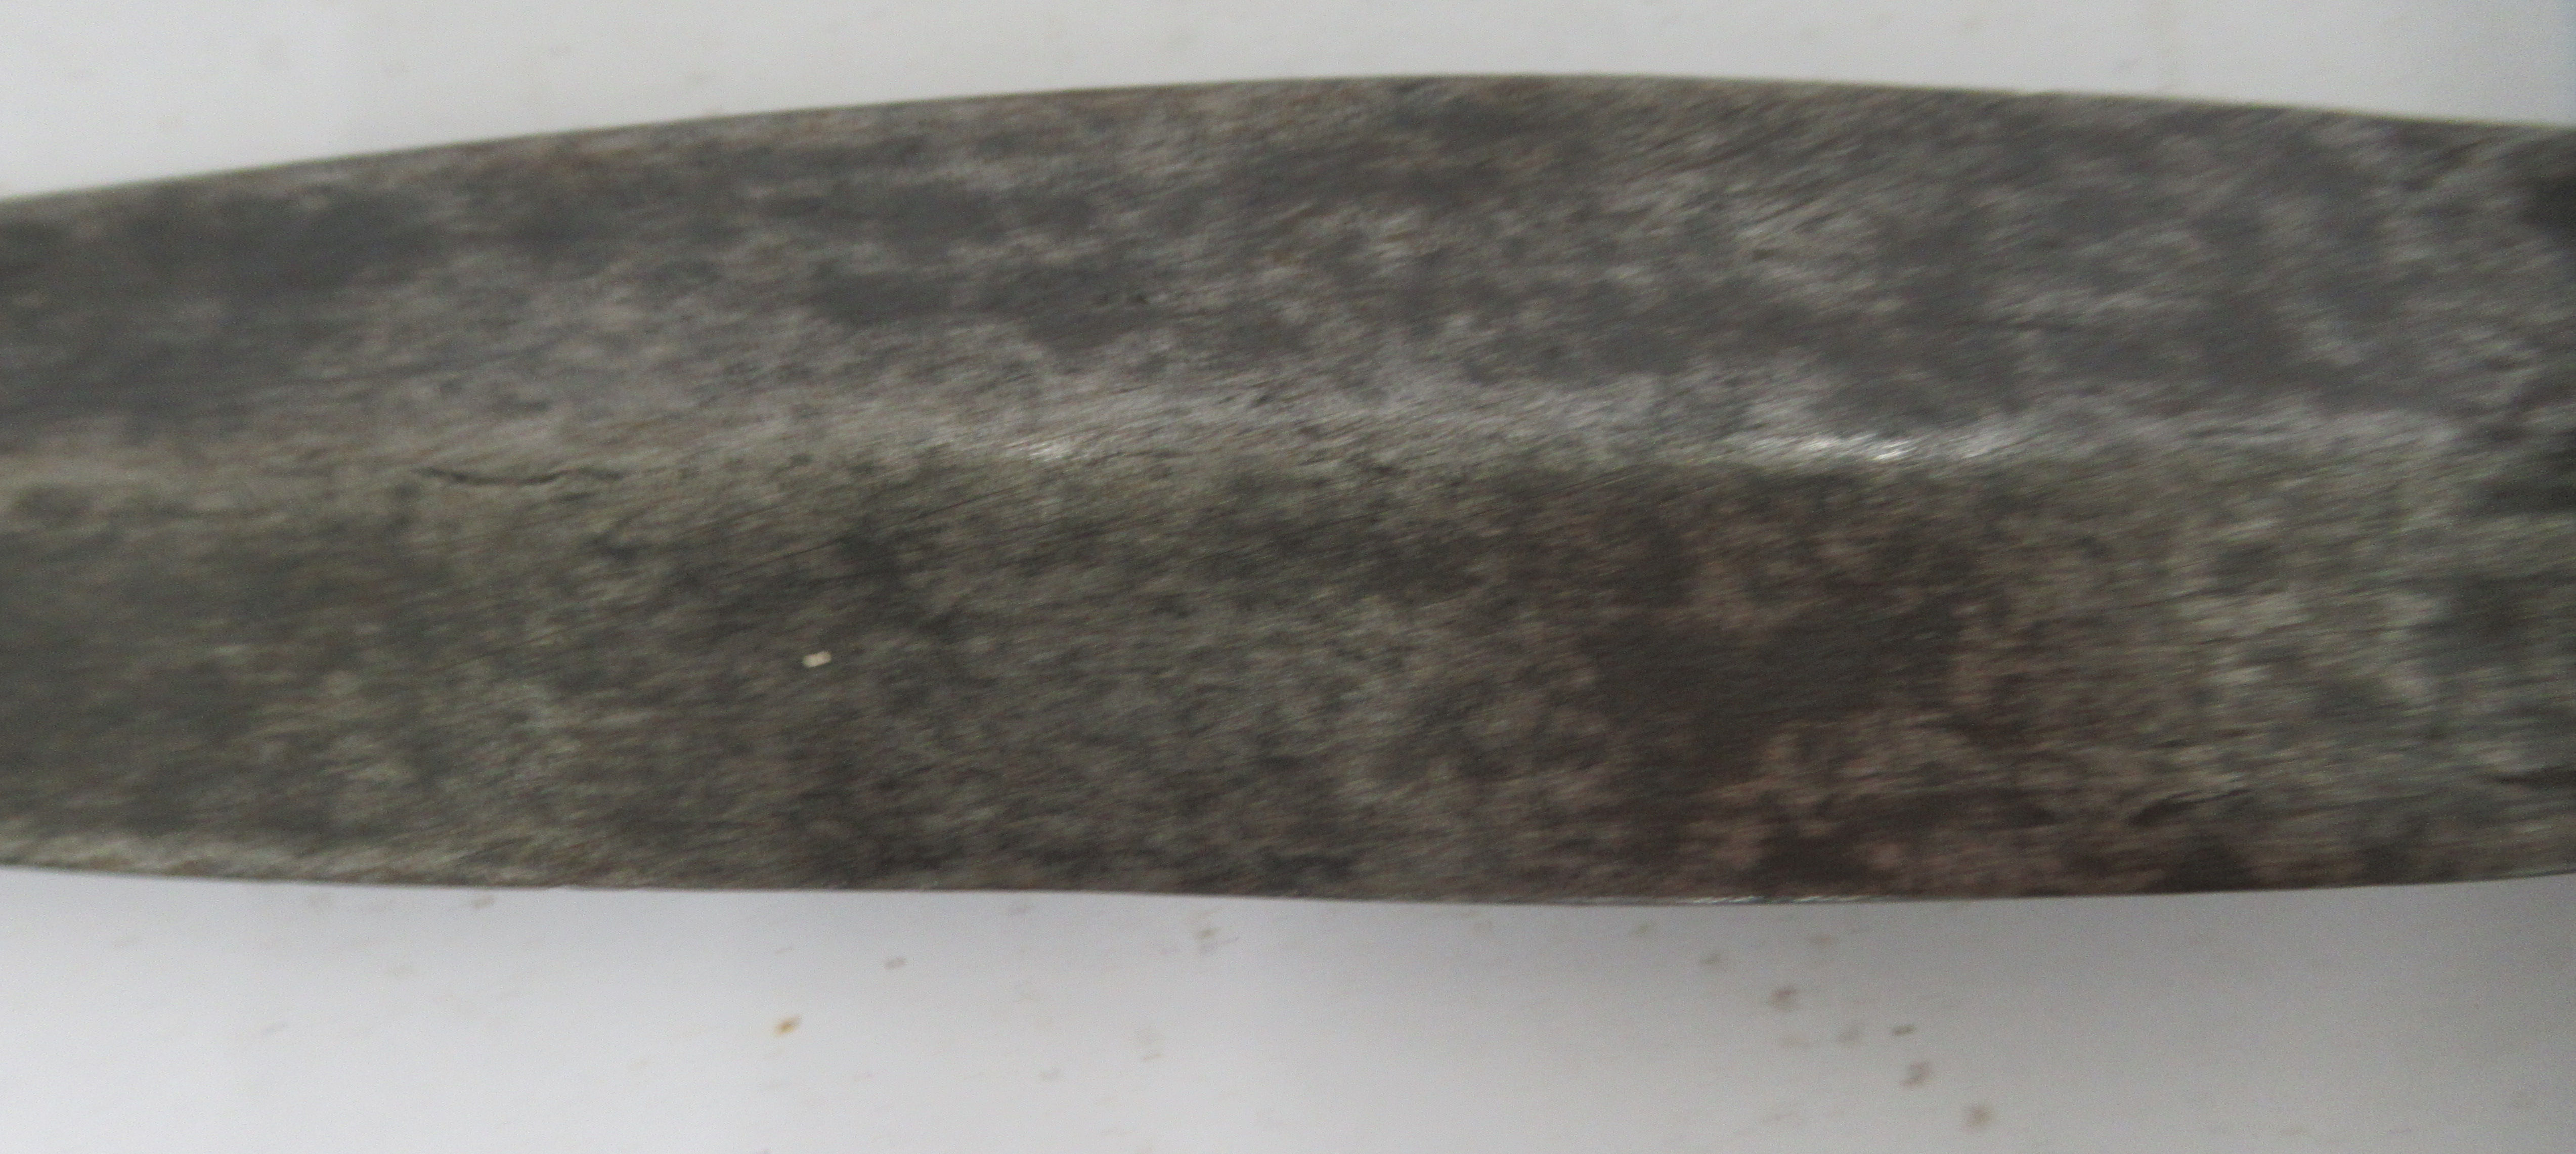 A late 19thC North Eastern Nigerian Tiv Tribe loop handled steel archers dagger  10.5"L overall - Image 3 of 9